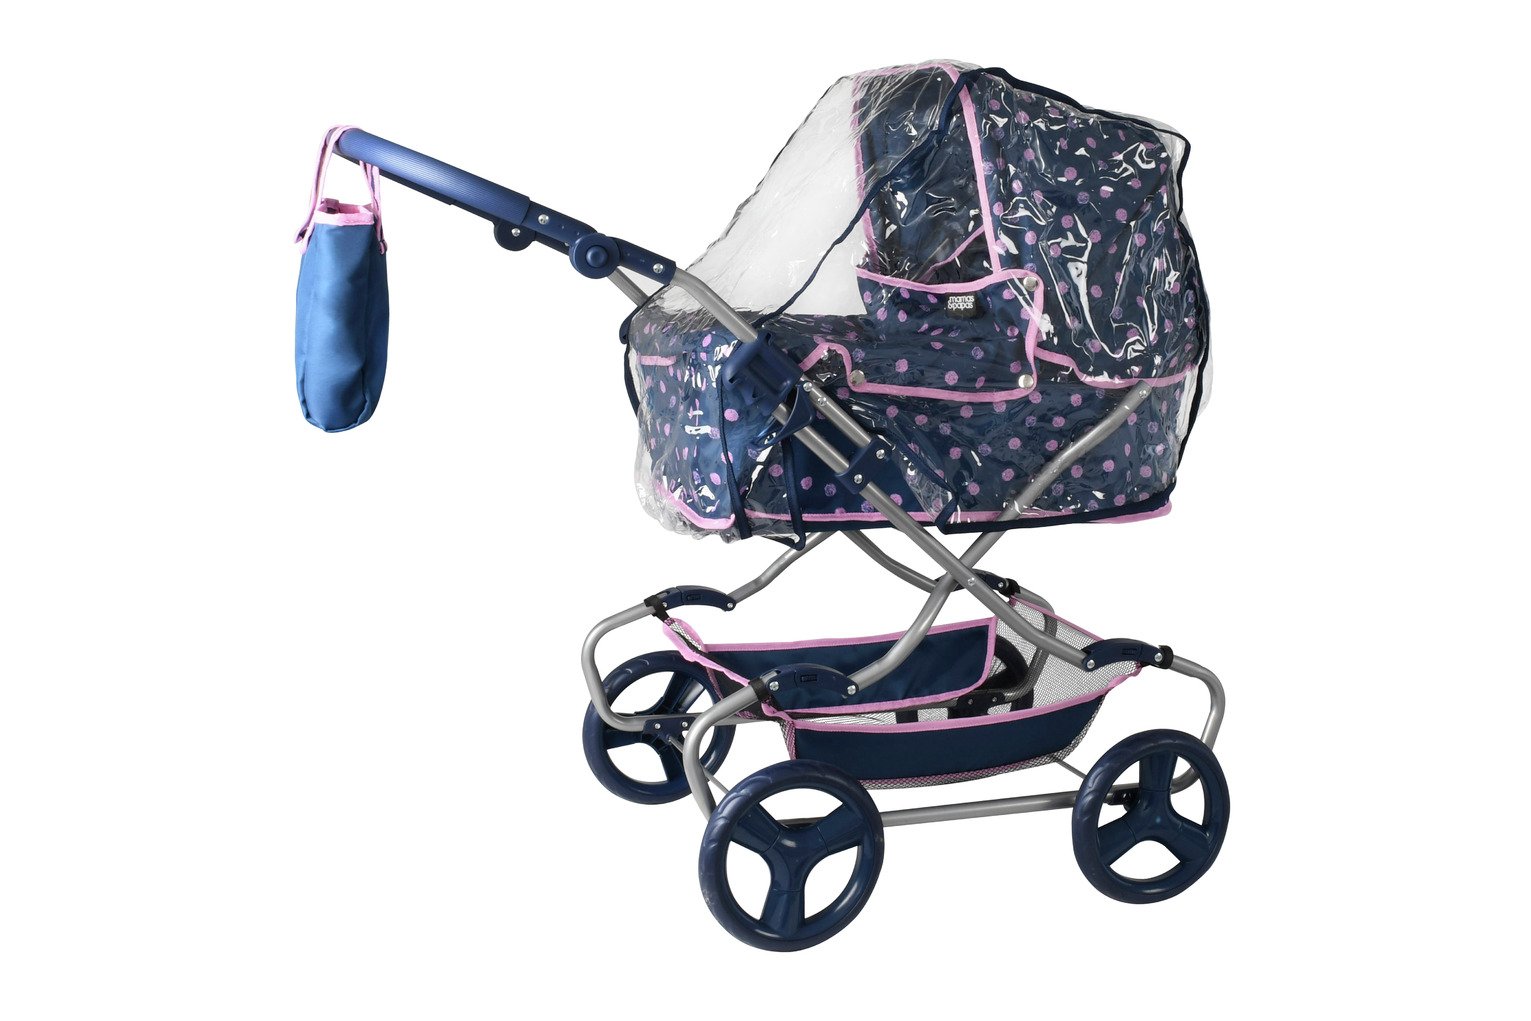 doll pram for 8 year old